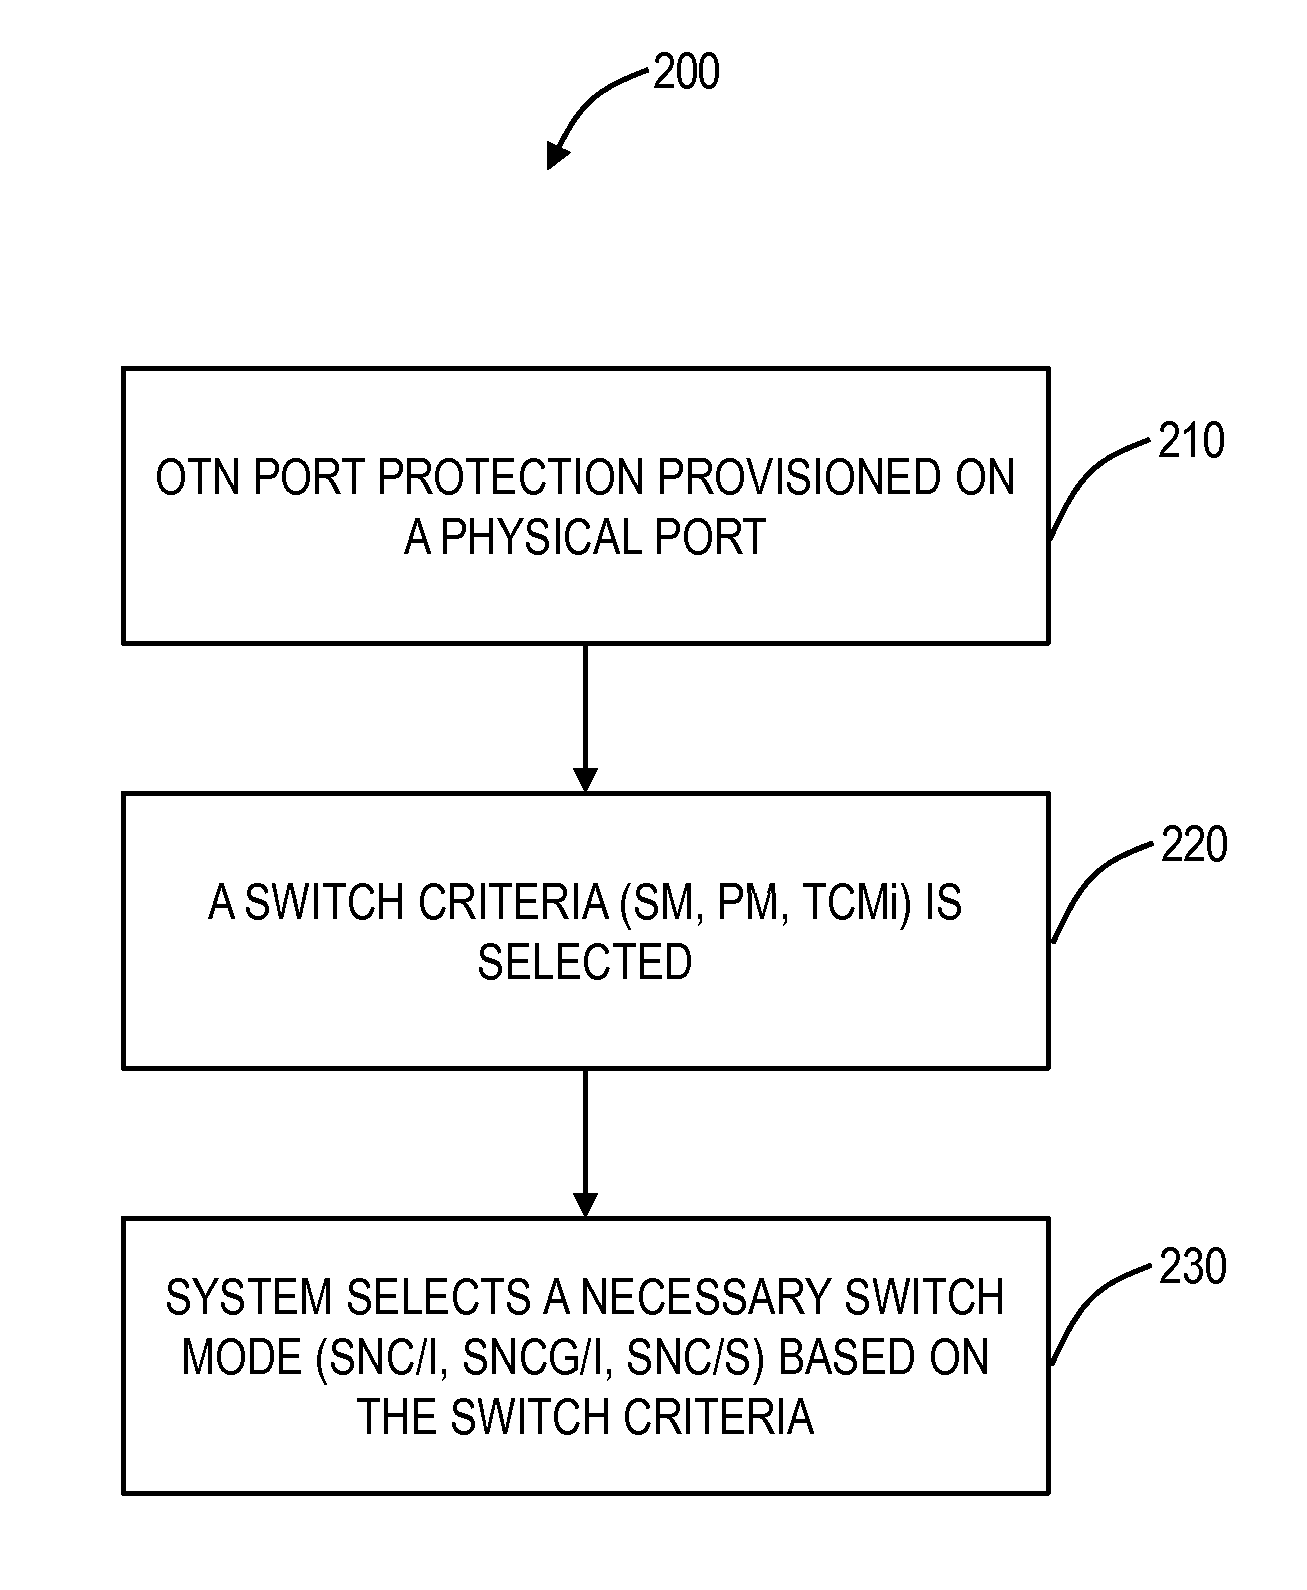 Optical transport network port protection systems and methods using flexible switch criteria